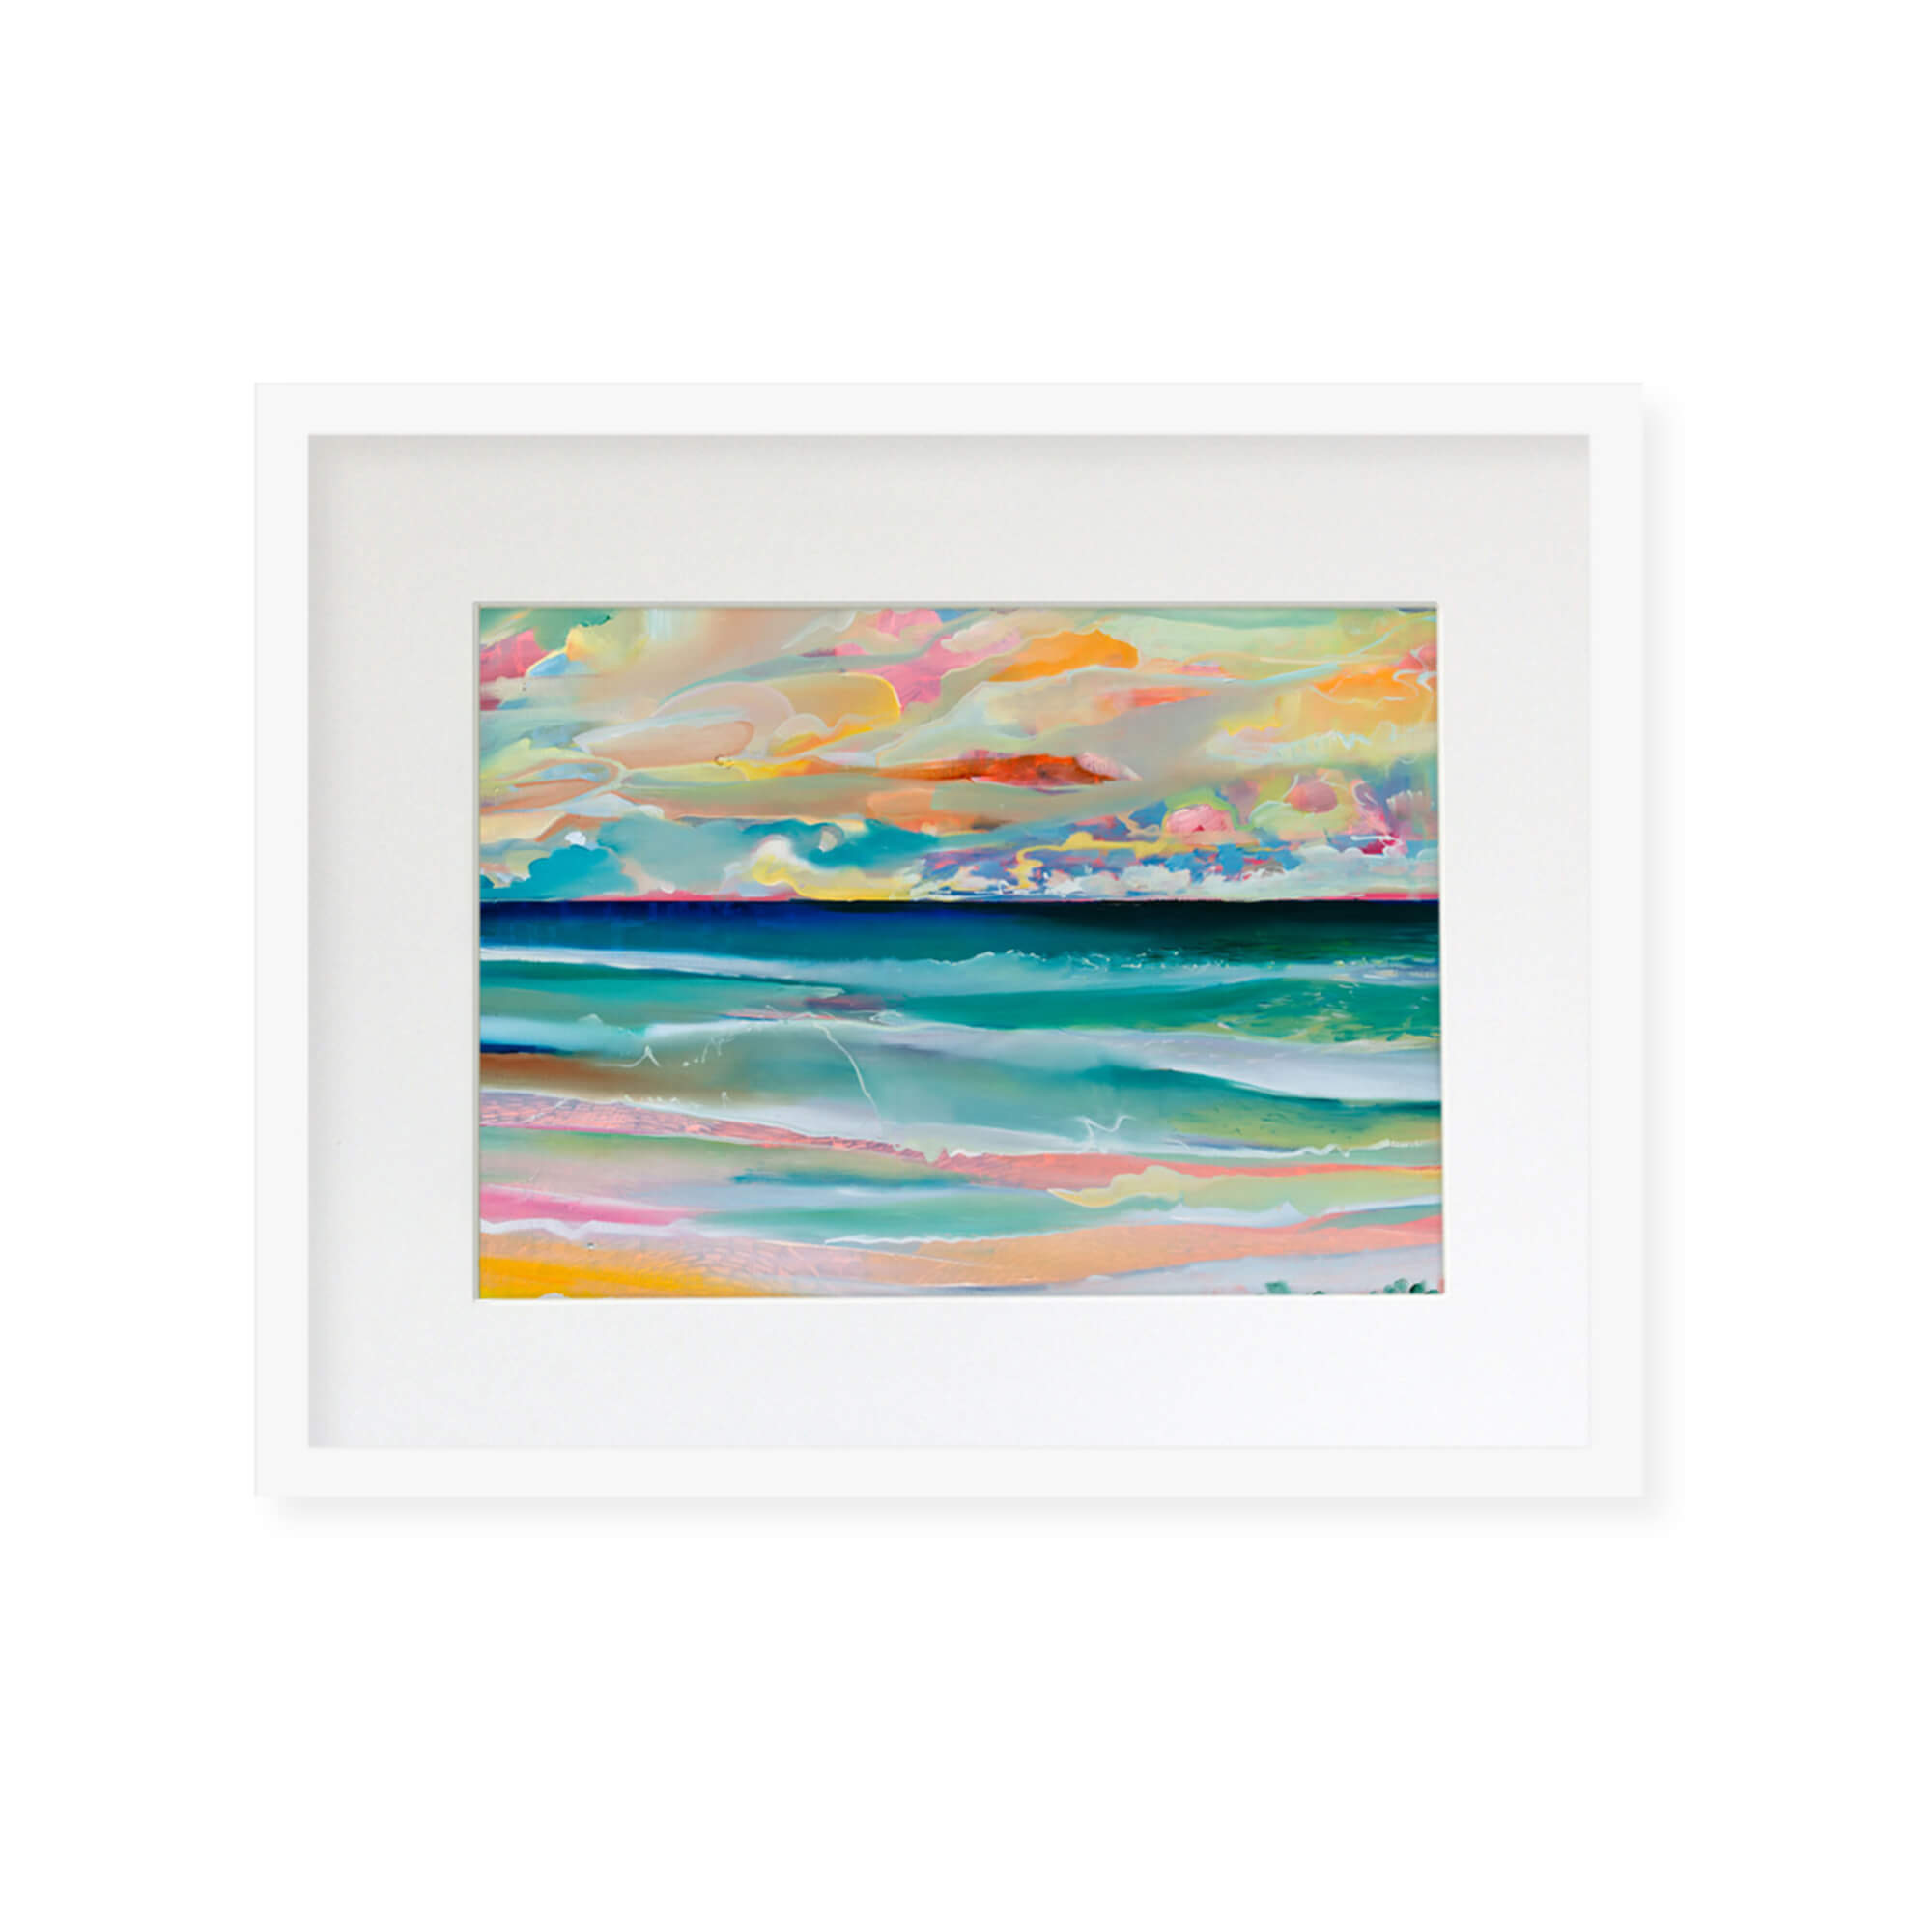 Framed matted art print of an abstract artwork of a seascape with pink, yellow and teal hues by Hawaii artist Saumolia Puapuaga